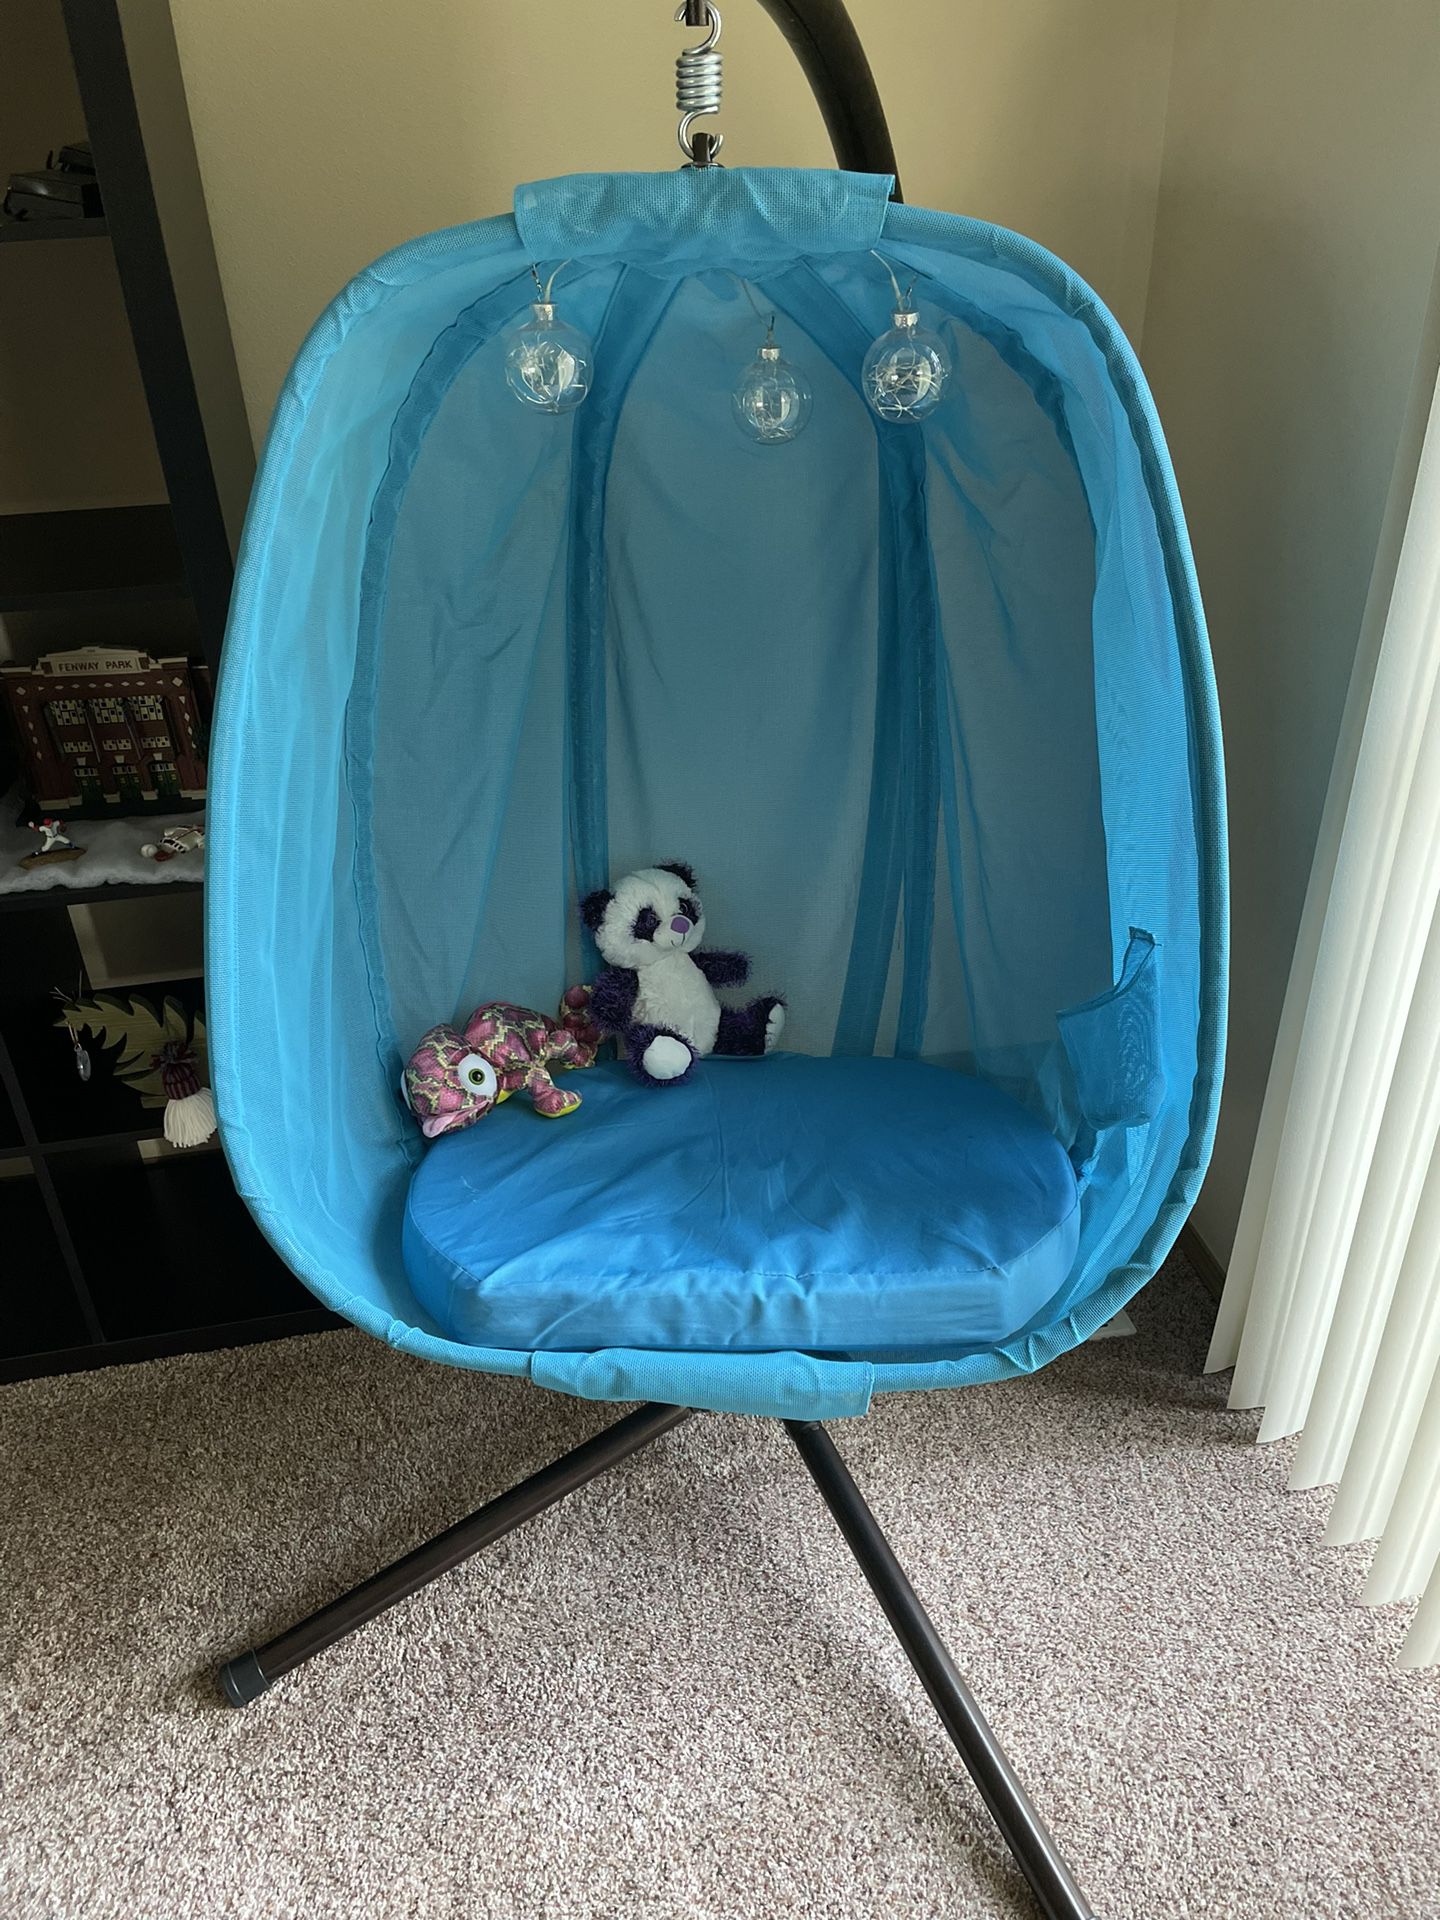 Hanging Egg Chair - with stand. https://offerup.com/redirect/?o=Rmxvd2VyaG91c2UuY29t retail Price $450